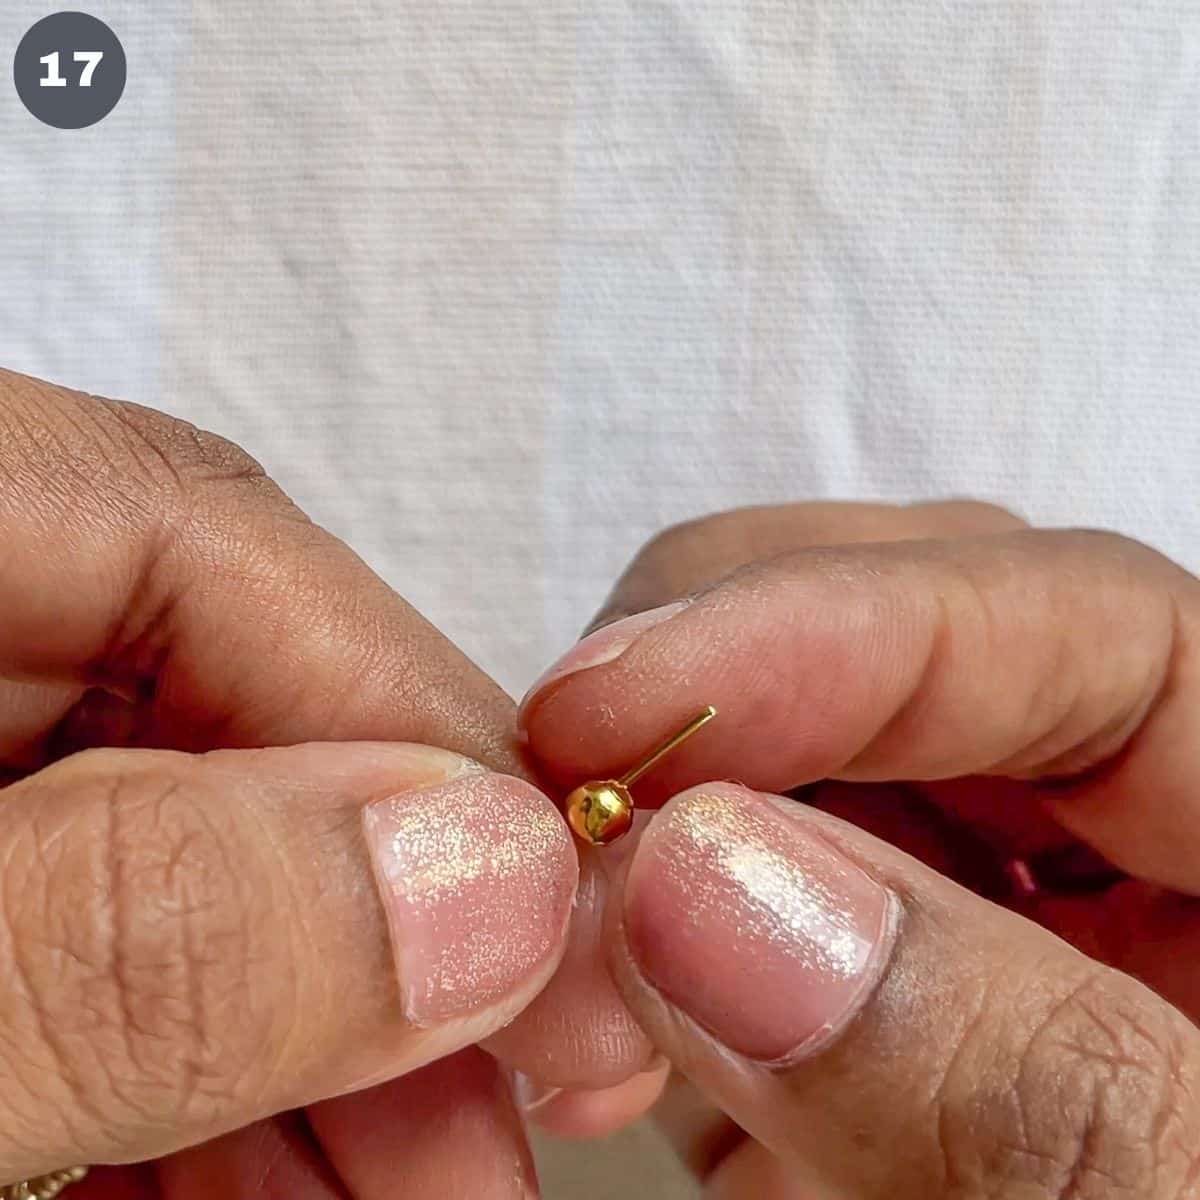 Inserting gold bead into an eye pin.